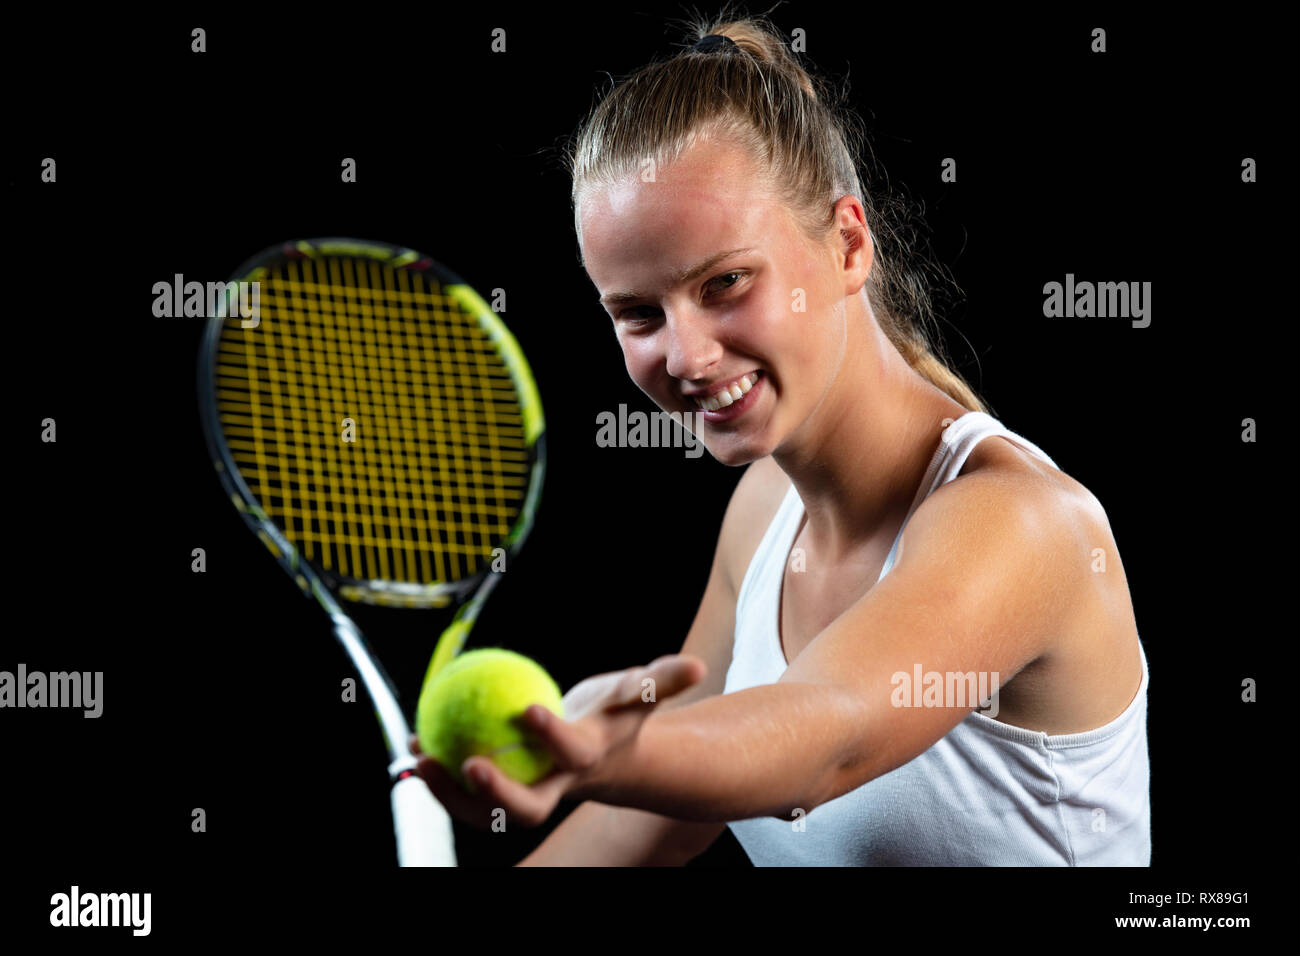 Young woman on a tennis practice. Beginner player holding a racket,  learning basic skills. Portrait on black background Stock Photo - Alamy